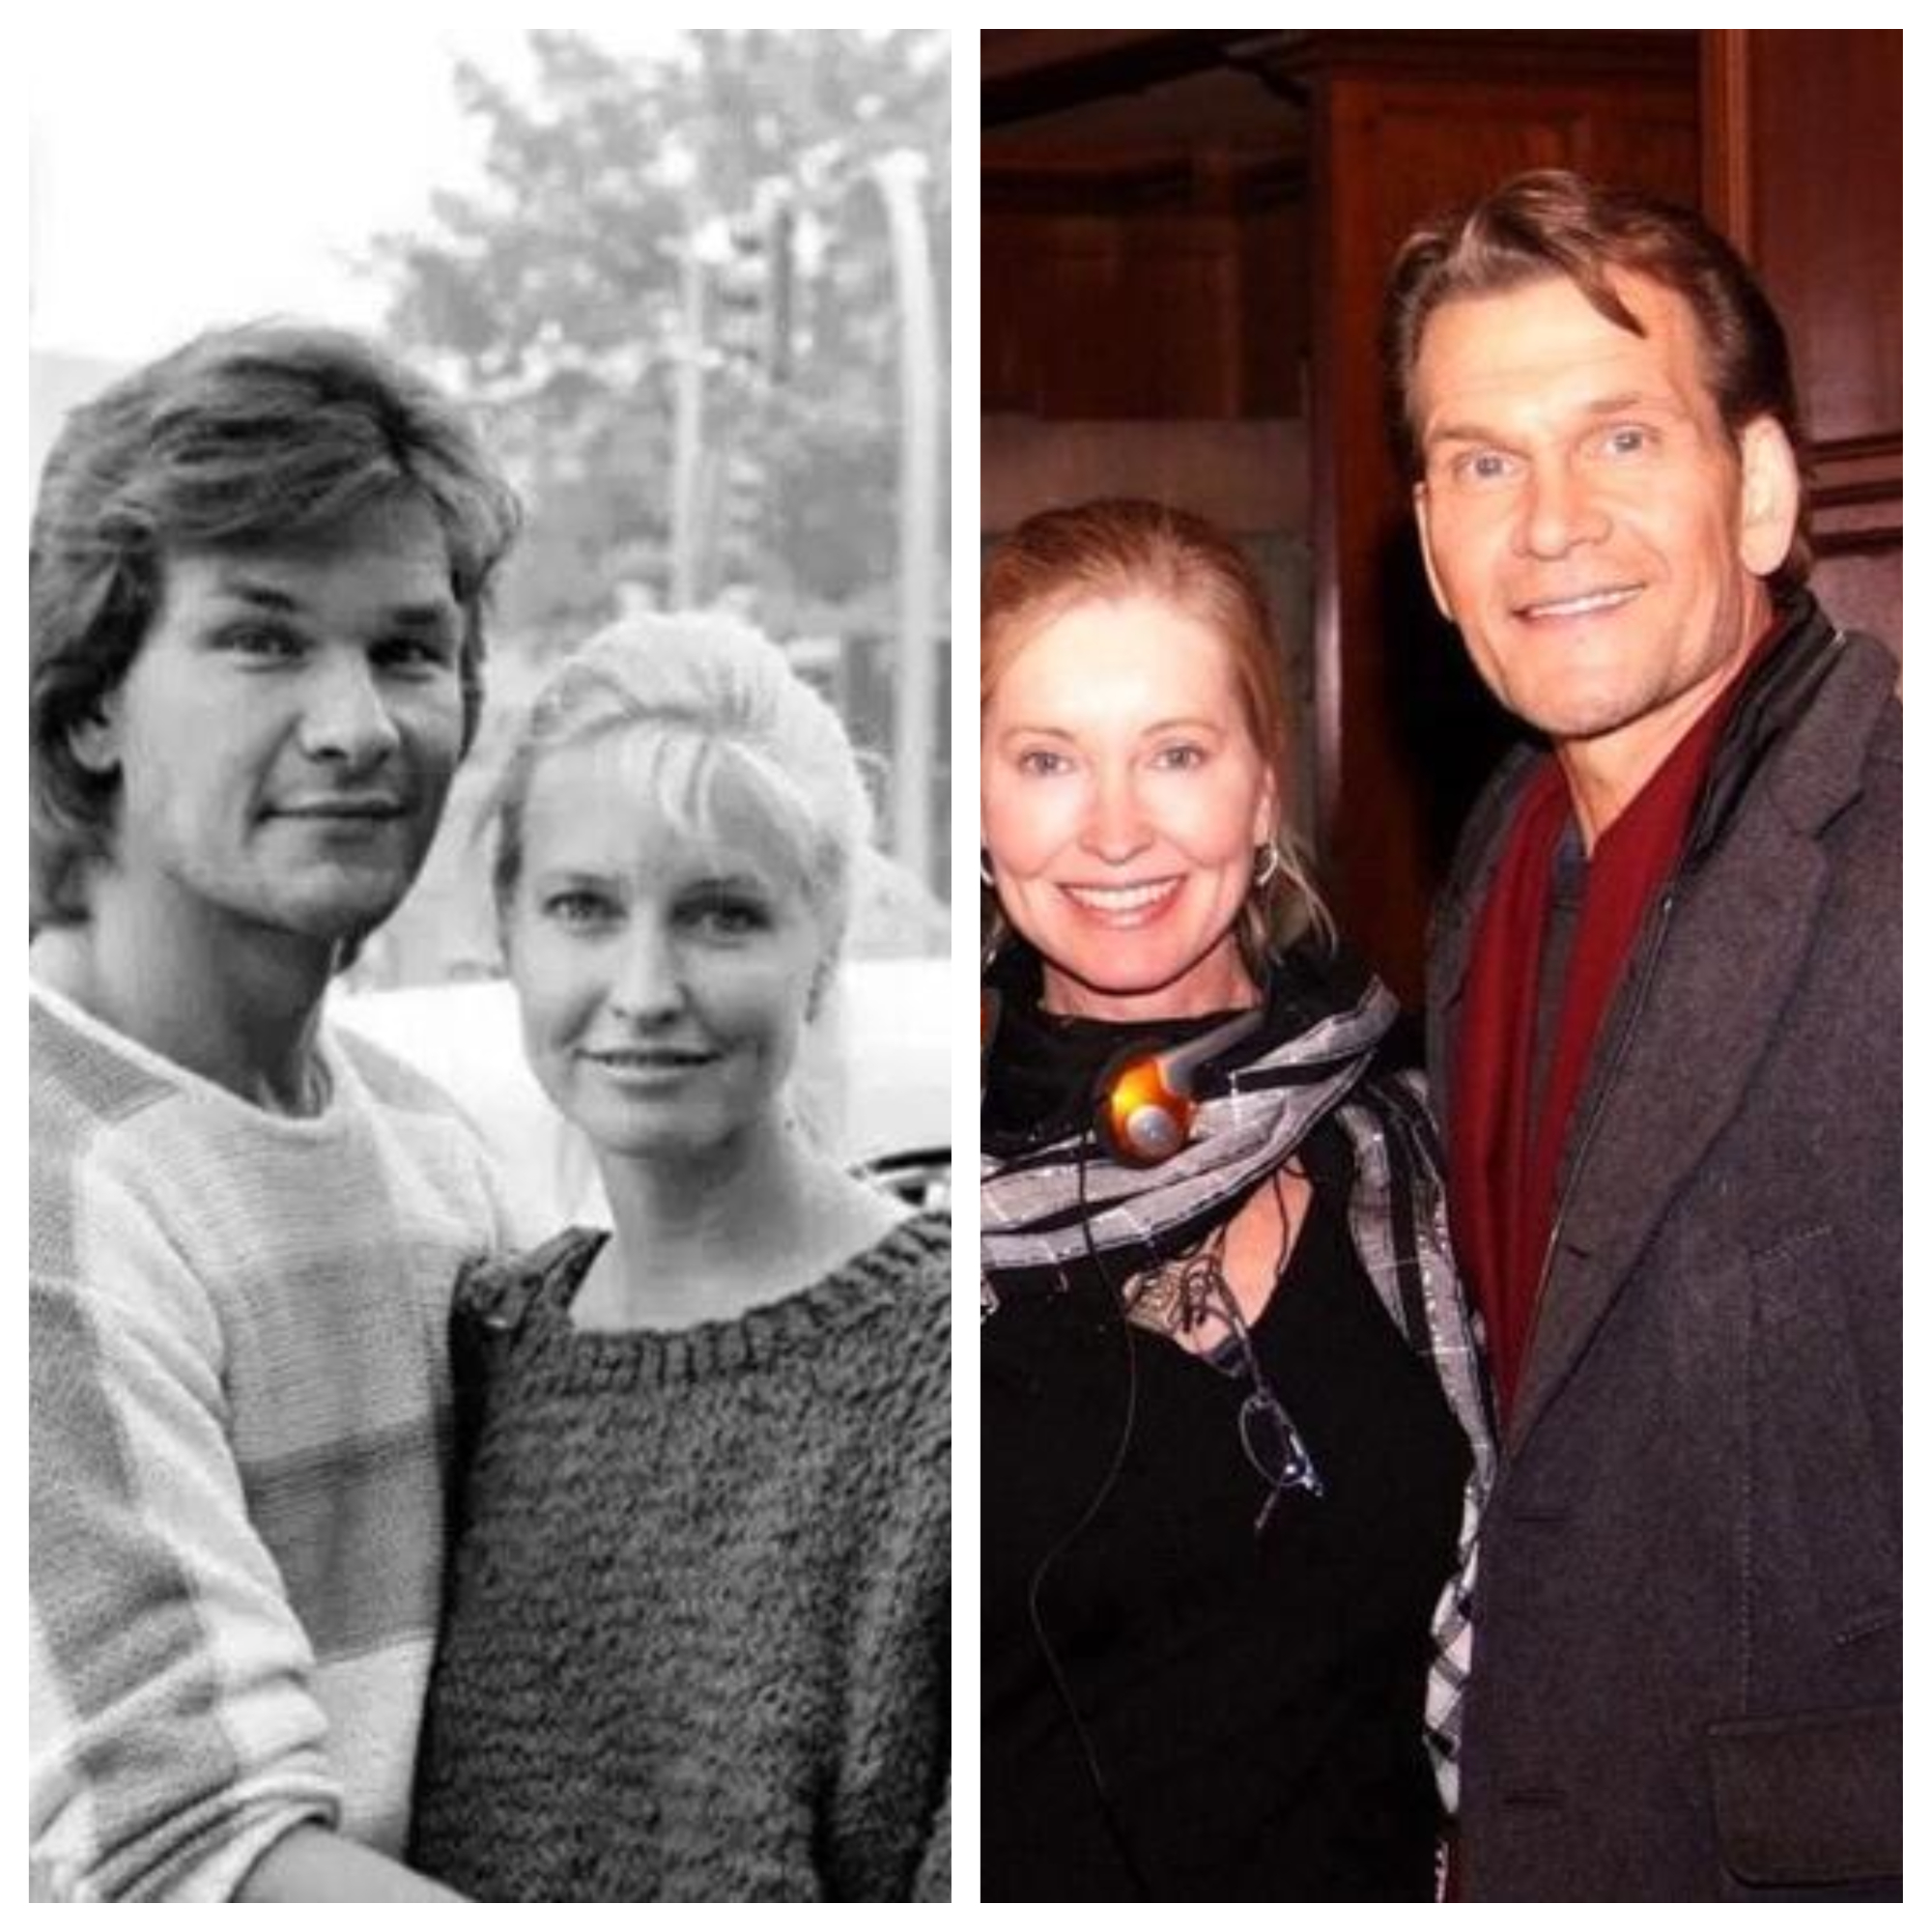 After the tragic loss of her husband, Patrick Swayze, to pancreatic cancer in 2009, Lisa Niemi